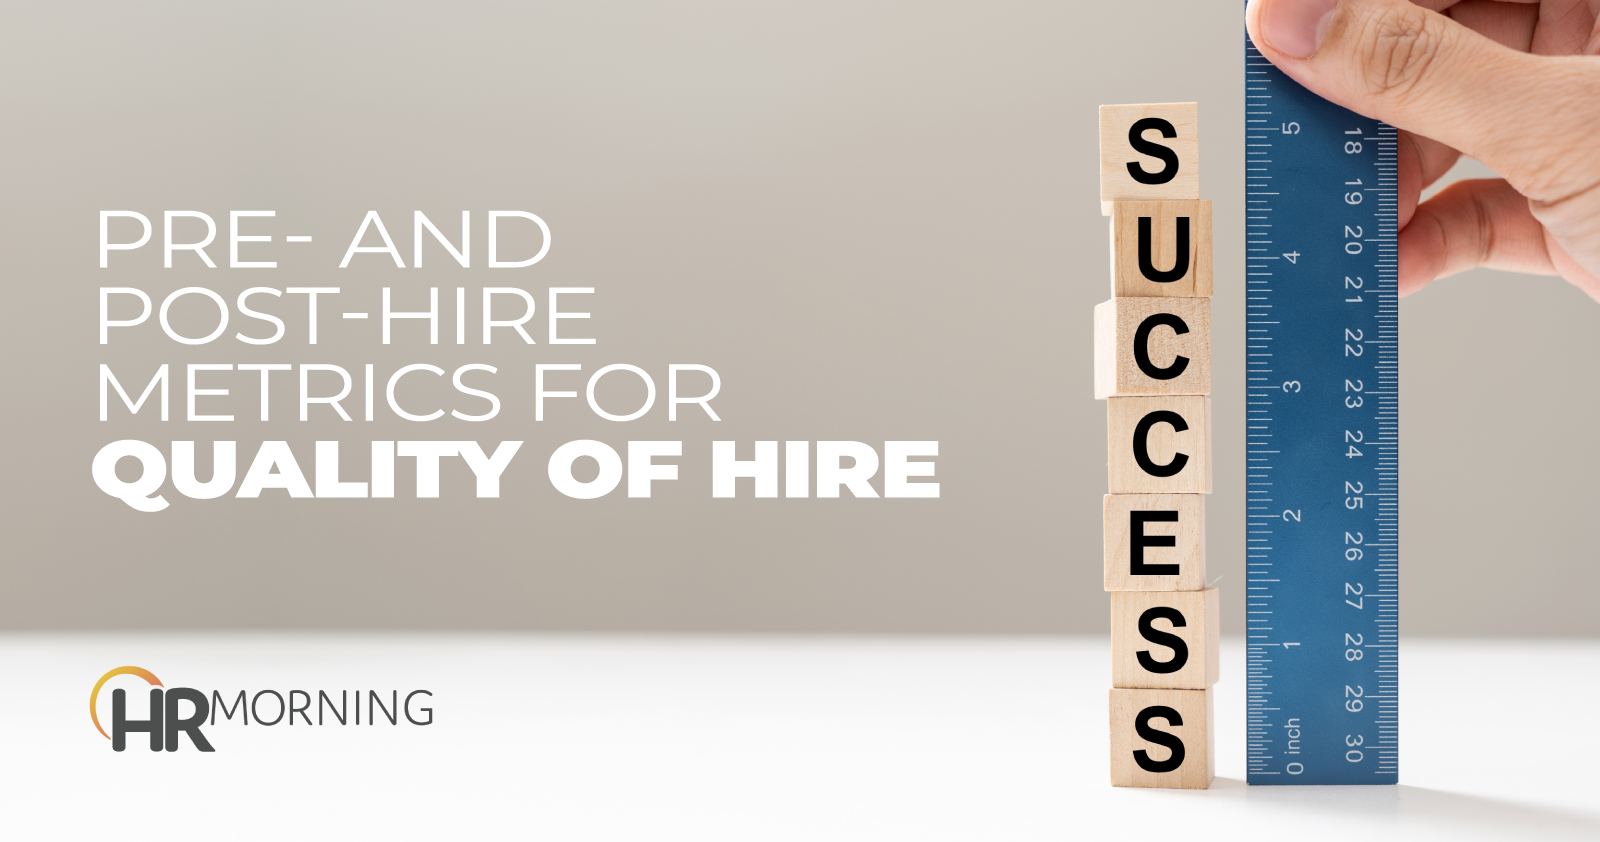 Pre- and post-hire metrics for quality of hire